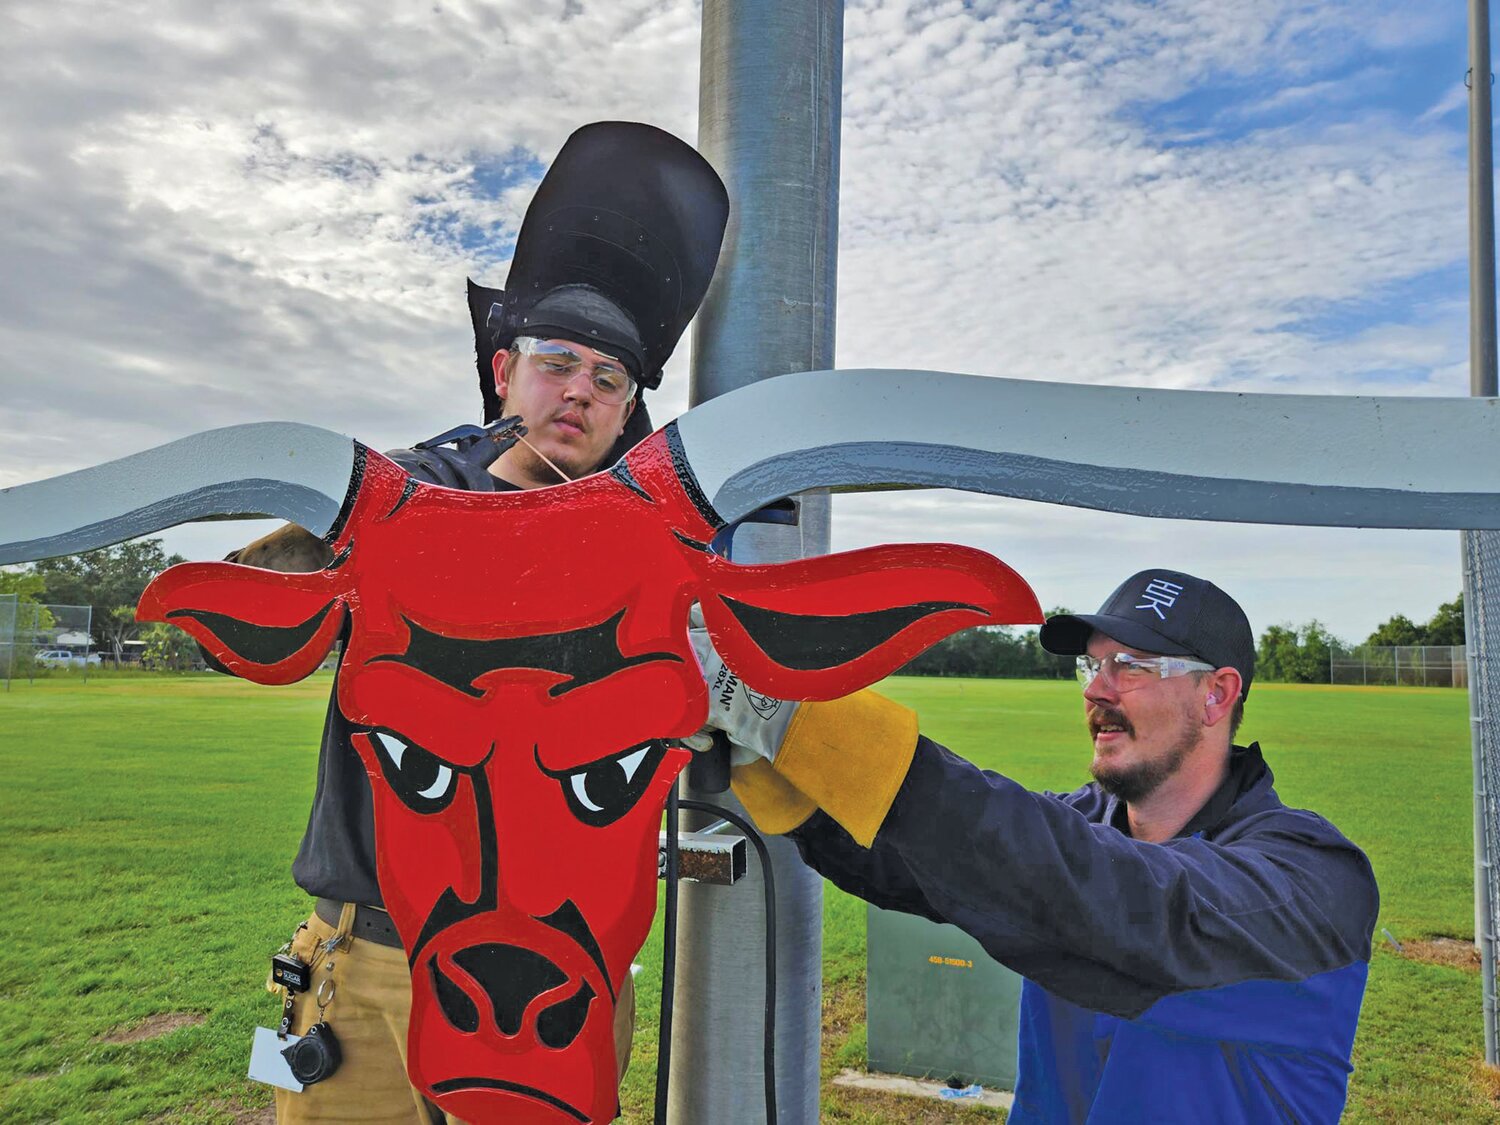 Aveary Vargas welded the Longhorn in place, along with  I.S.T.A. Instructor Jeremy Dean supervising the job.